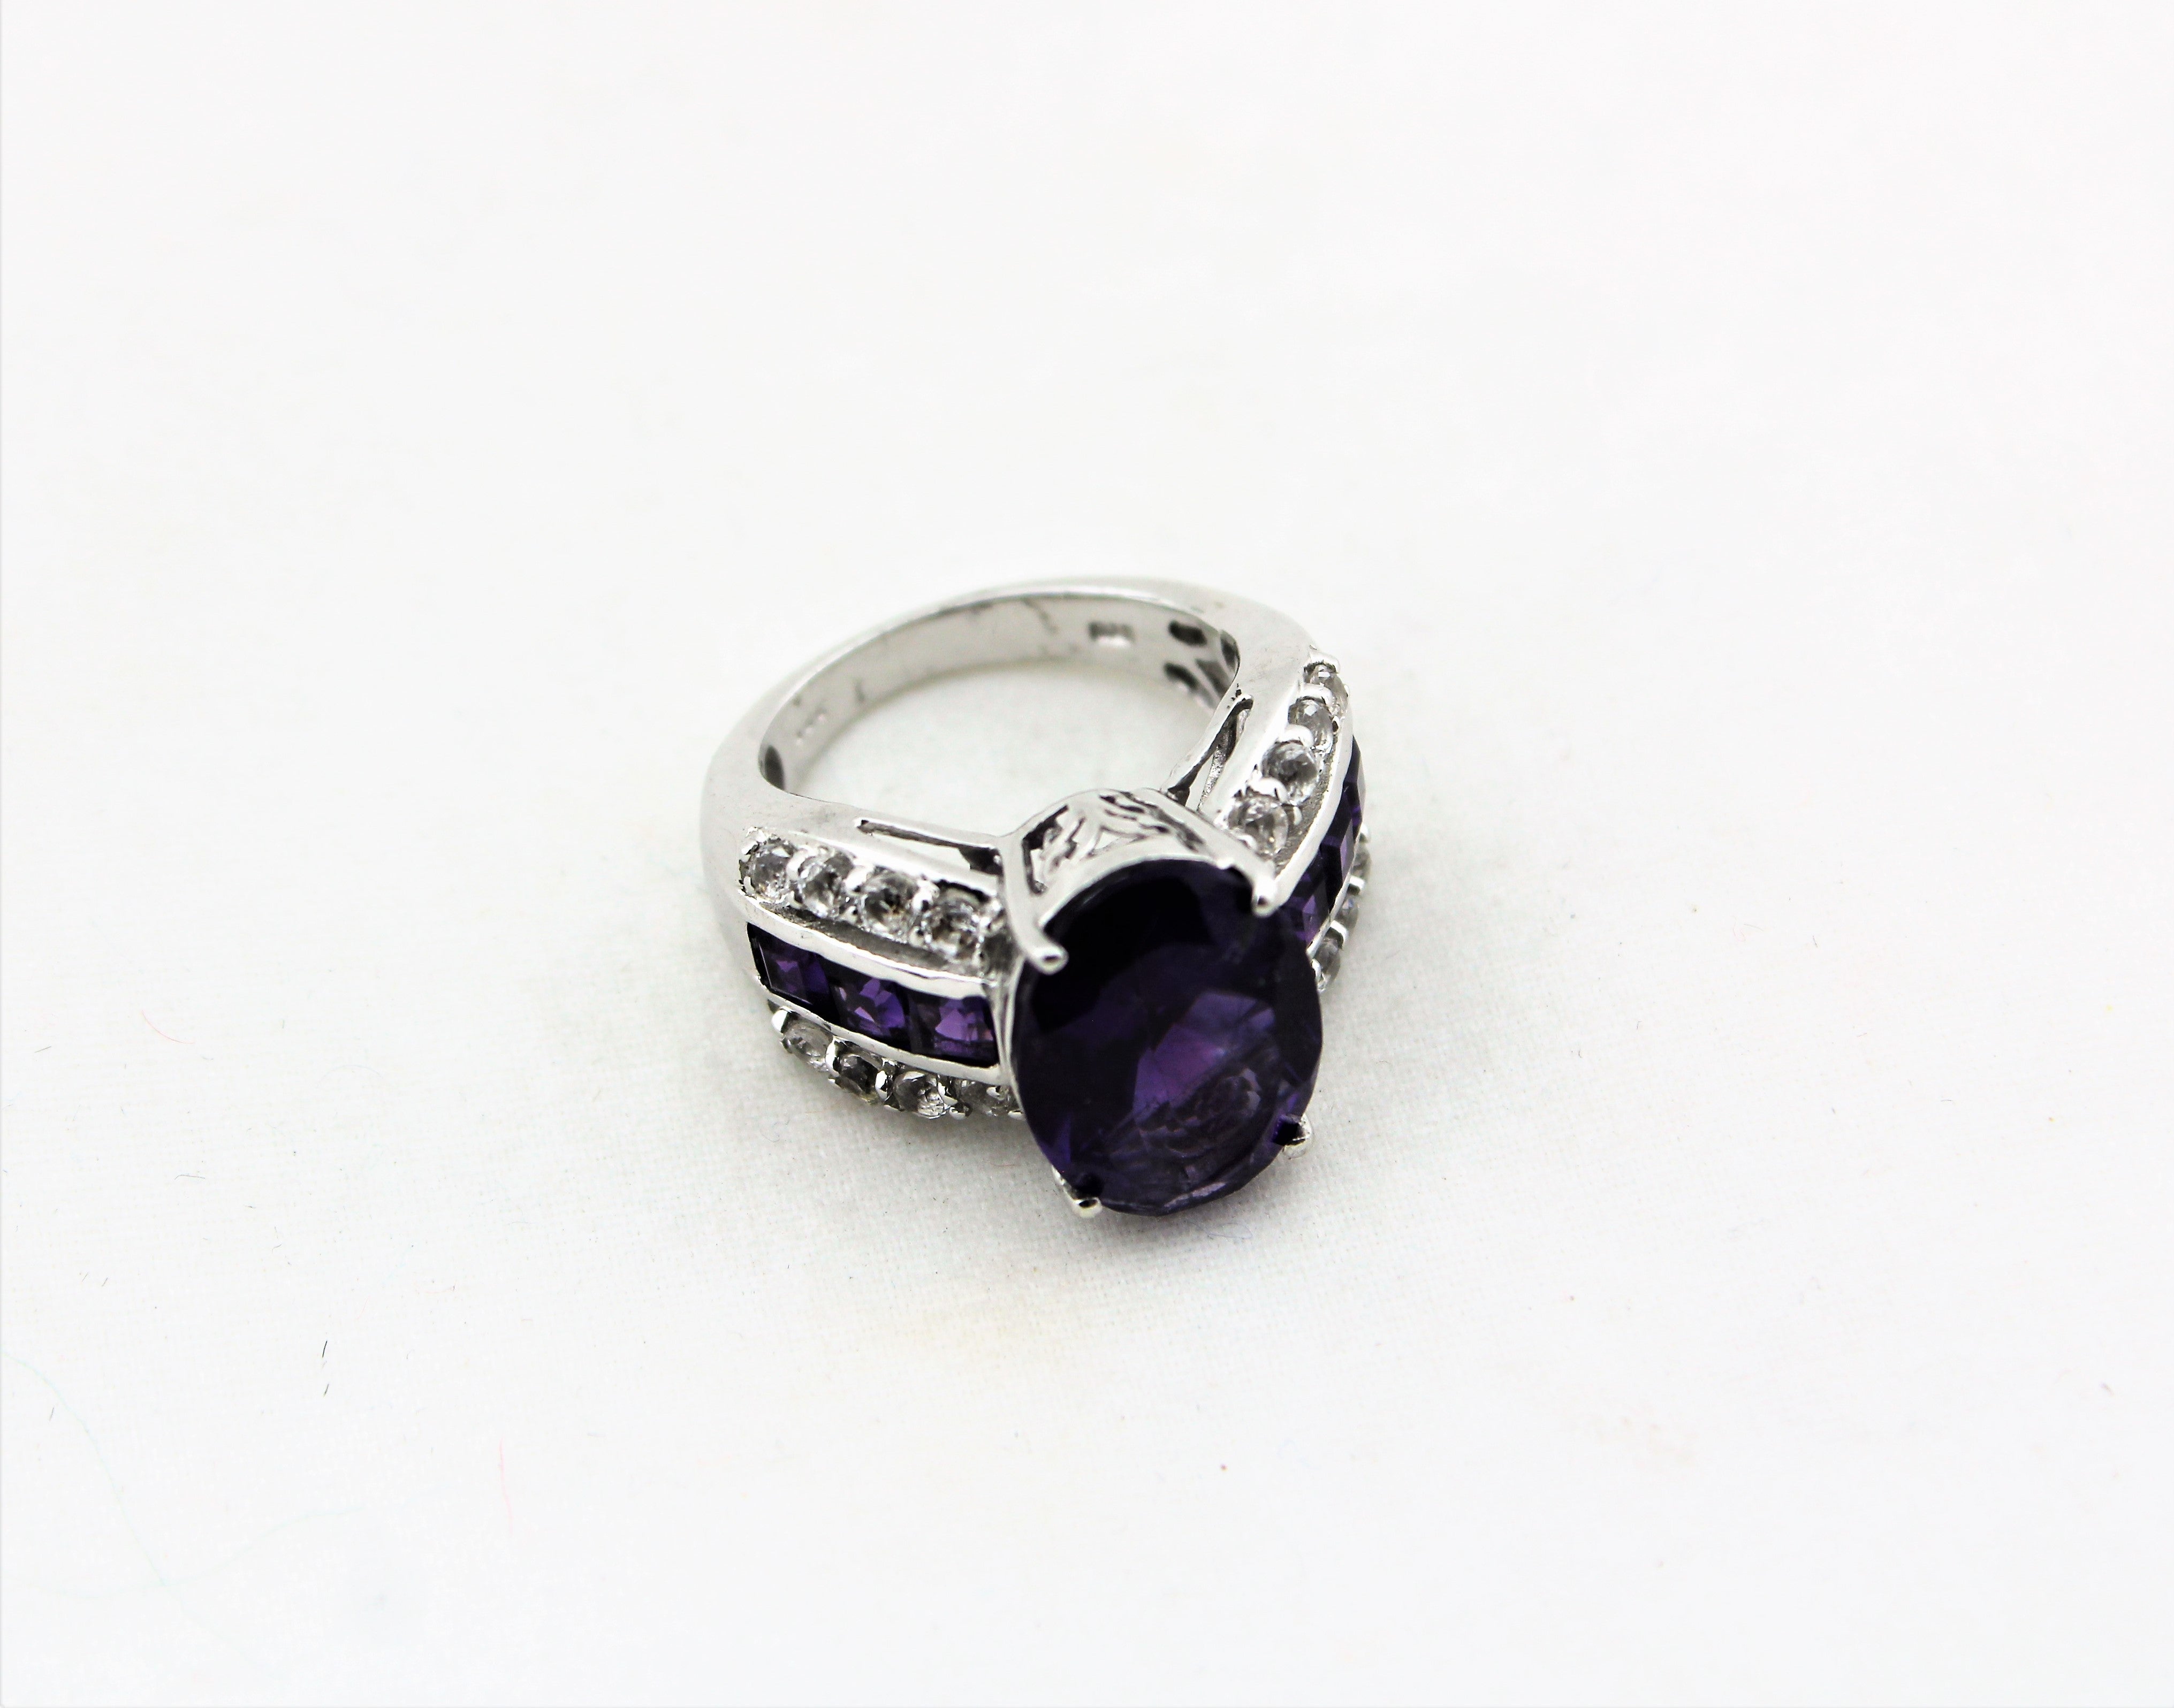 Sterling Silver Amethyst Cocktail Ring